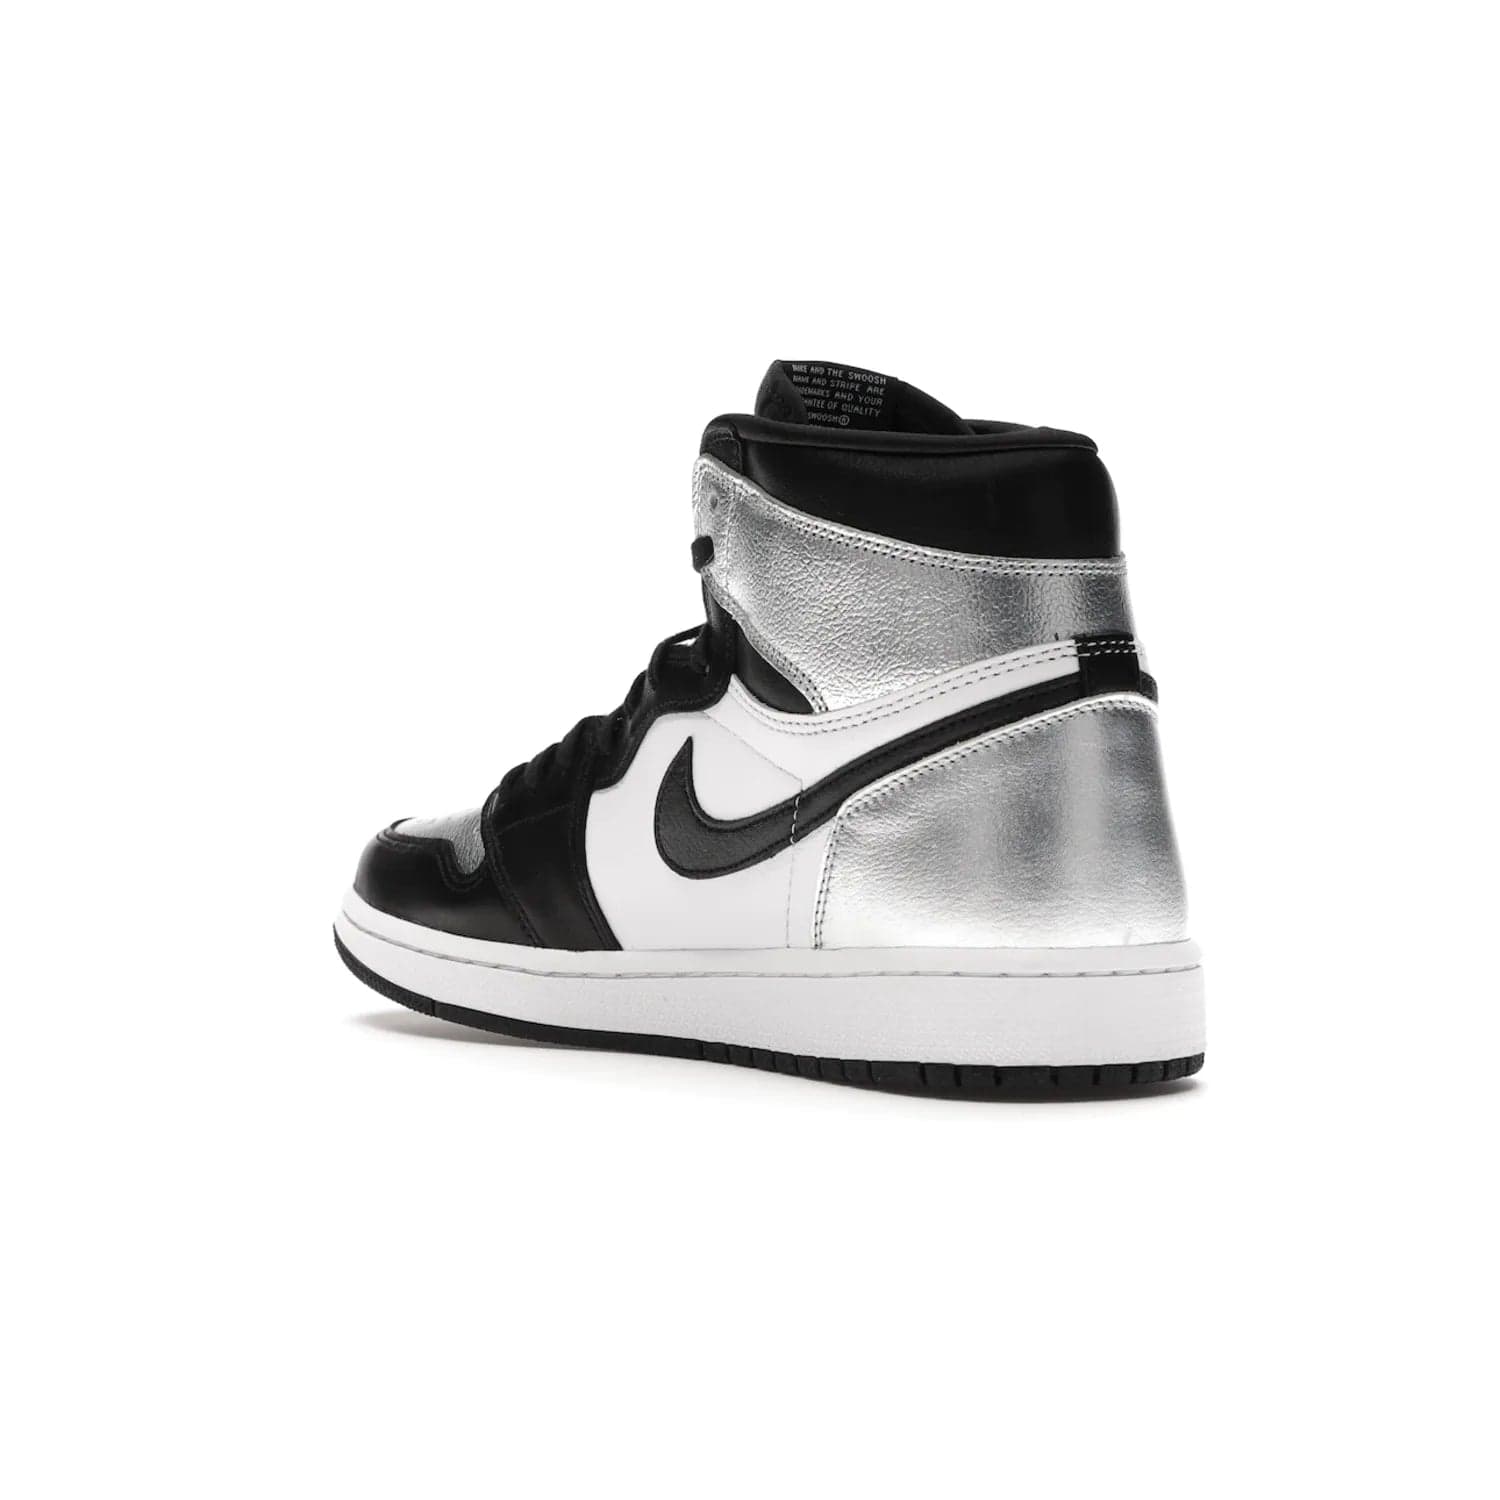 Jordan 1 Retro High Silver Toe (Women's) - Image 24 - Only at www.BallersClubKickz.com - Introducing the Jordan 1 Retro High Silver Toe (Women's): an updated spin on the iconic 'Black Toe' theme. Featuring white & black leather and silver patent leather construction. Nike Air branding, Air Jordan Wings logo, and white/black sole finish give a classic look. The perfect addition to an on-trend streetwear look. Available in classic black & white, this Jordan 1 is an instant classic. Released in February 20